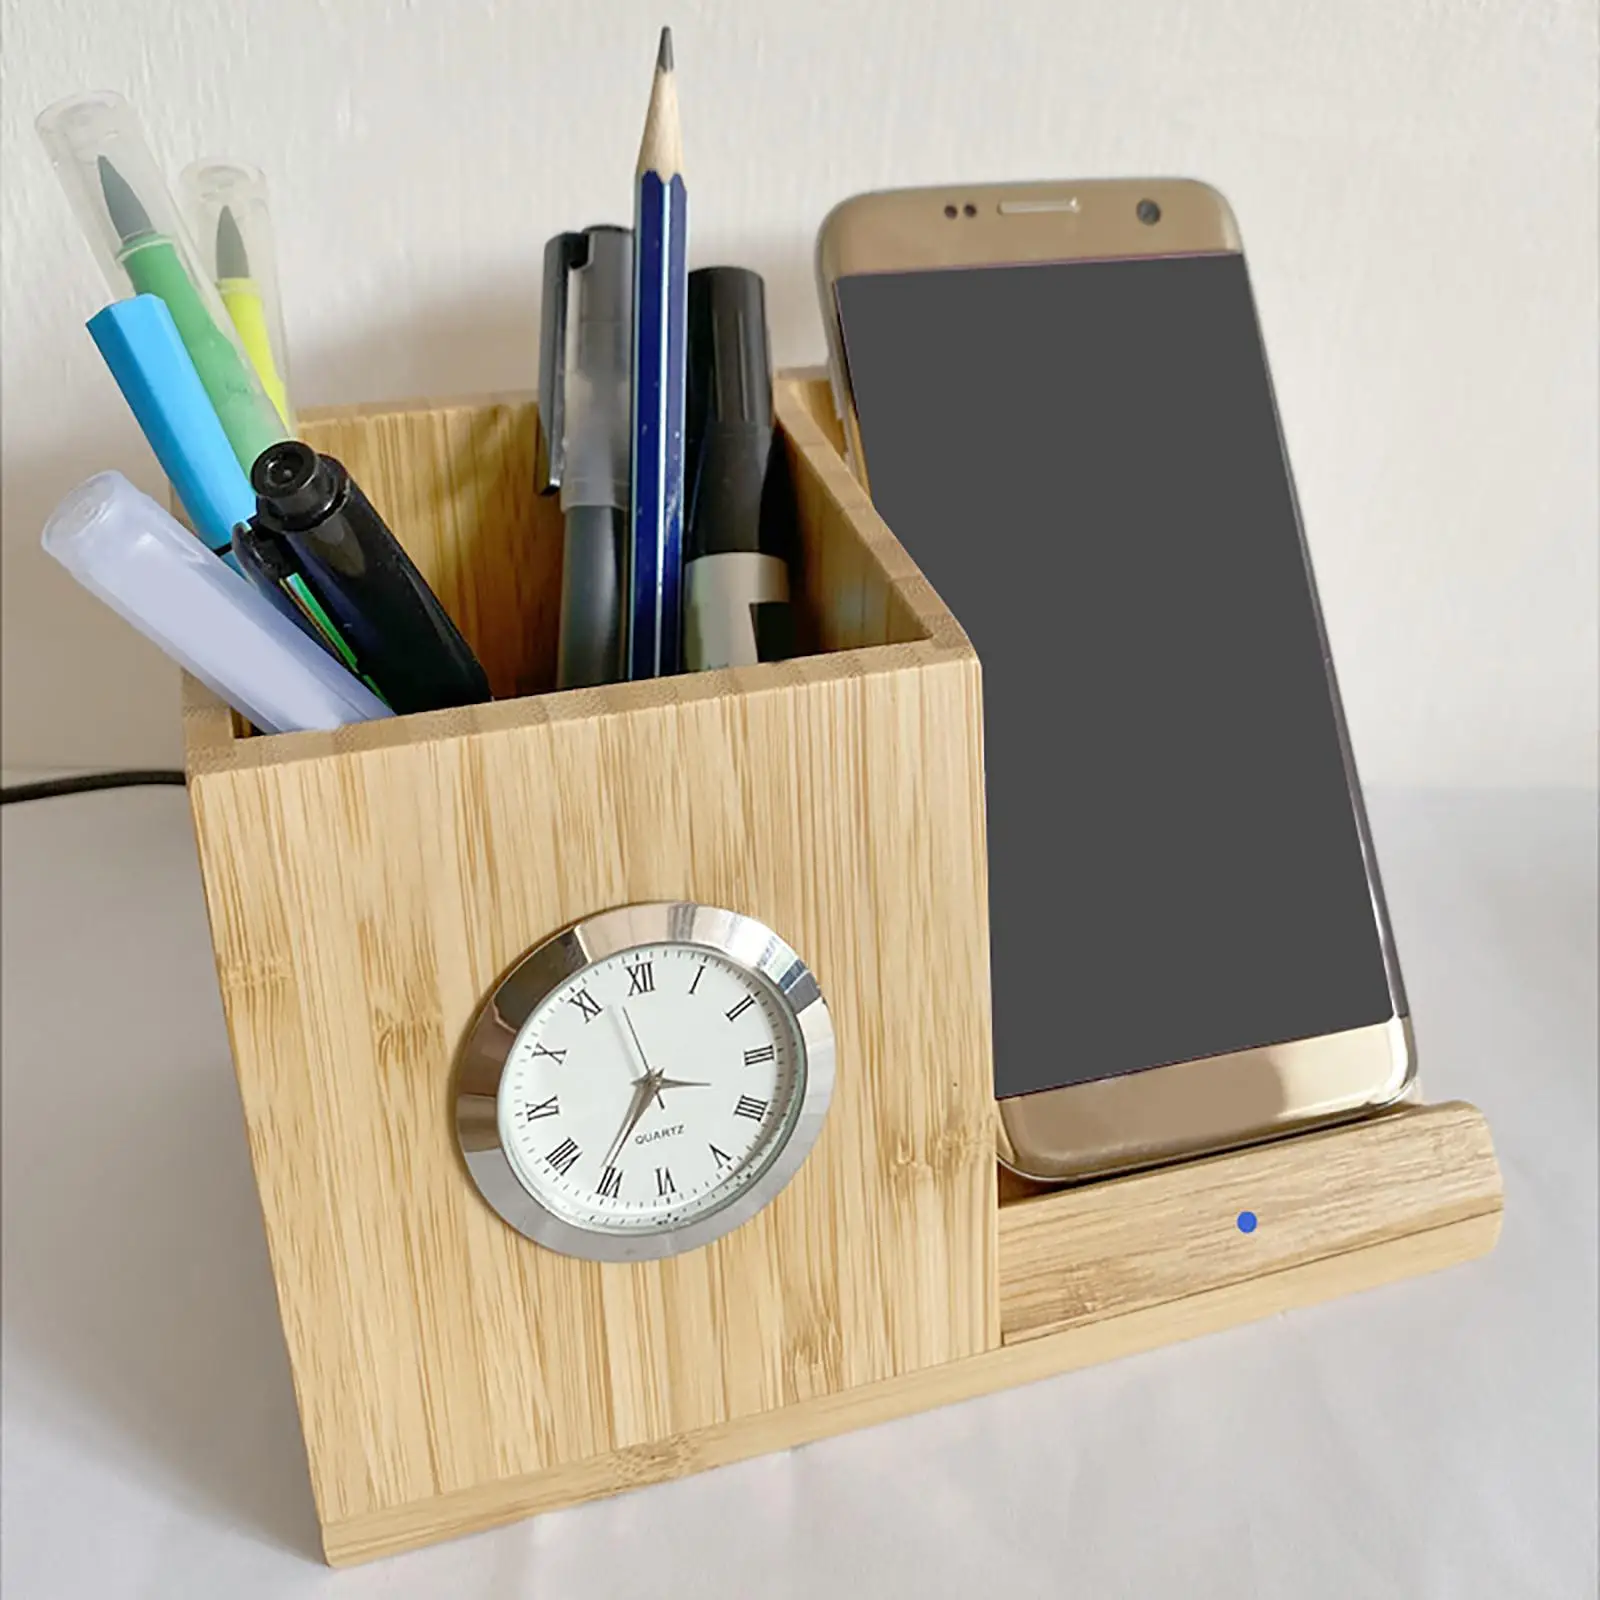 1x Wireless Charger 10W Pen Holder W/ Clock Bamboo Wood 4in1 Multifunction Durable Phone Charging Station for Pencil Storage